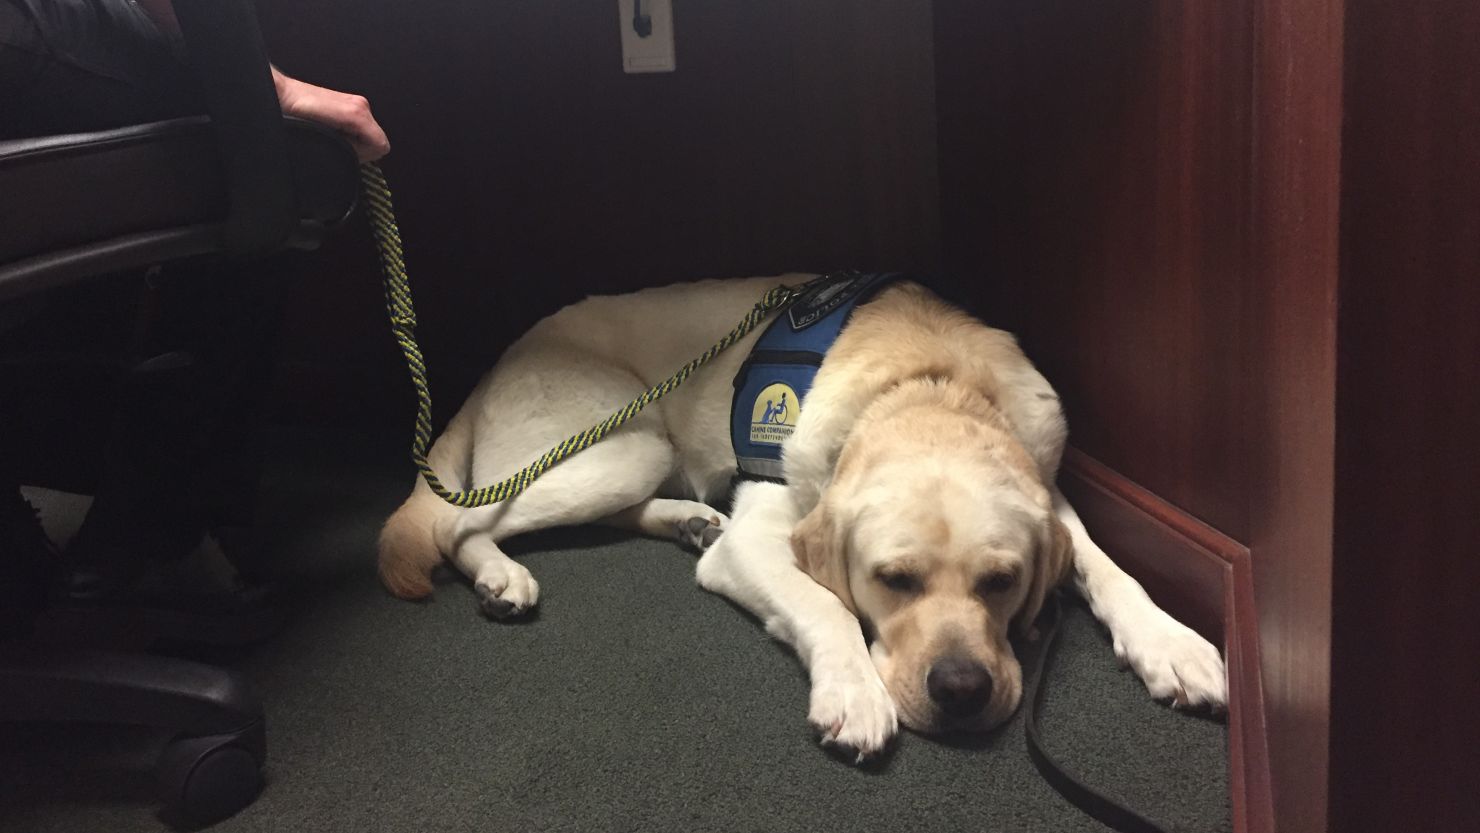 Raider, a facility dog with the Corona Police Department, has supported the Turpin children for more than a year, his handler said.